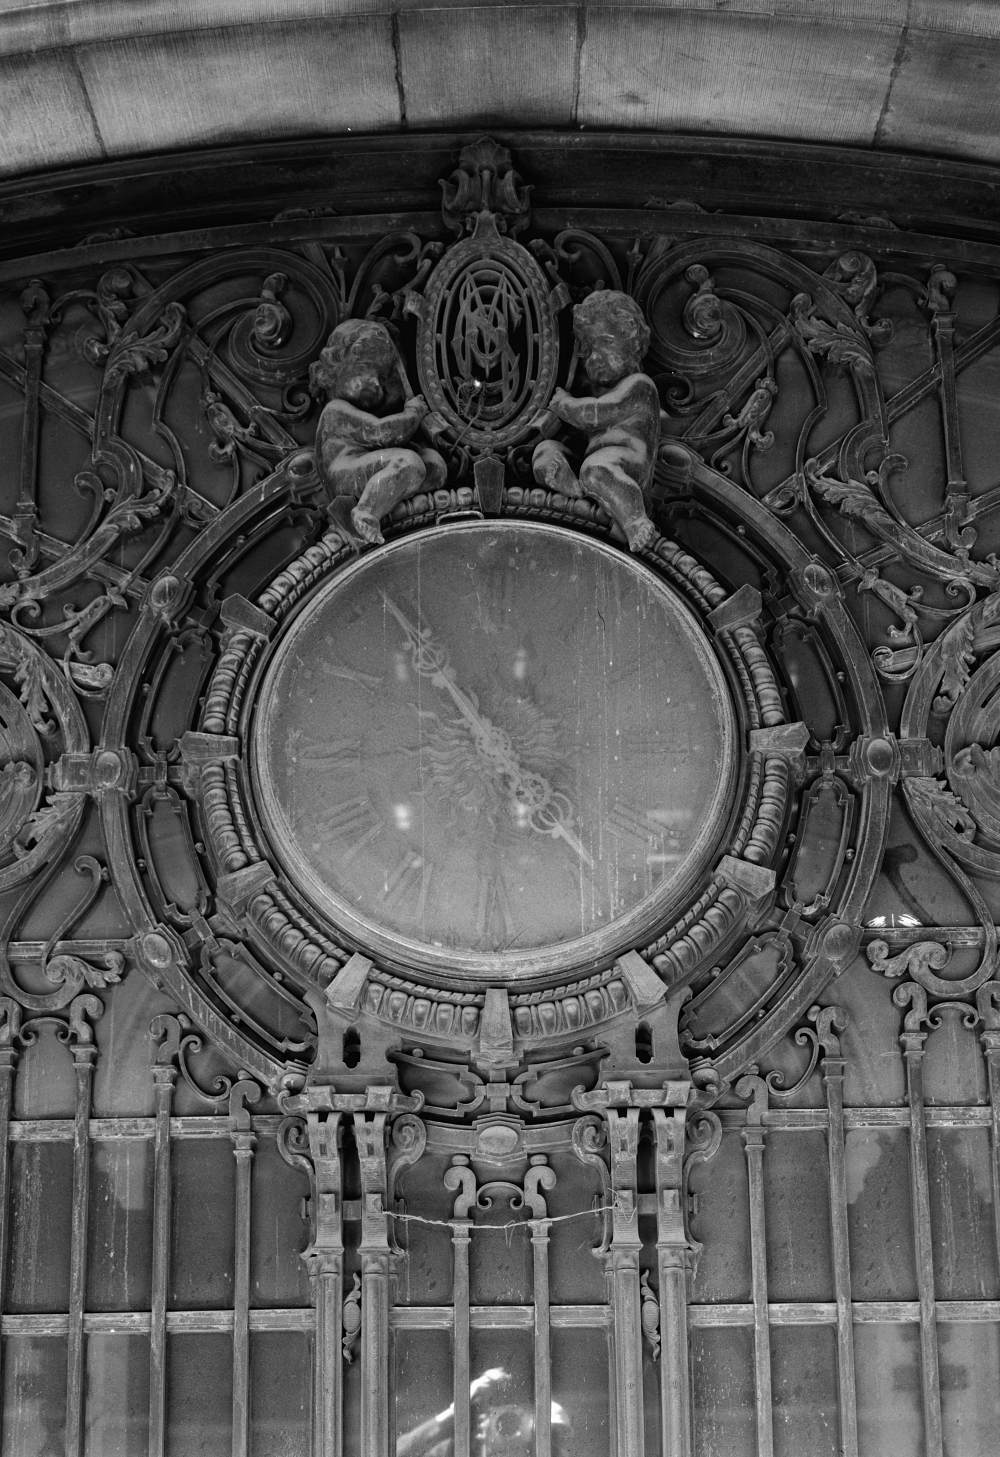 one of the clocks in the Singer Tower seen just before demolition